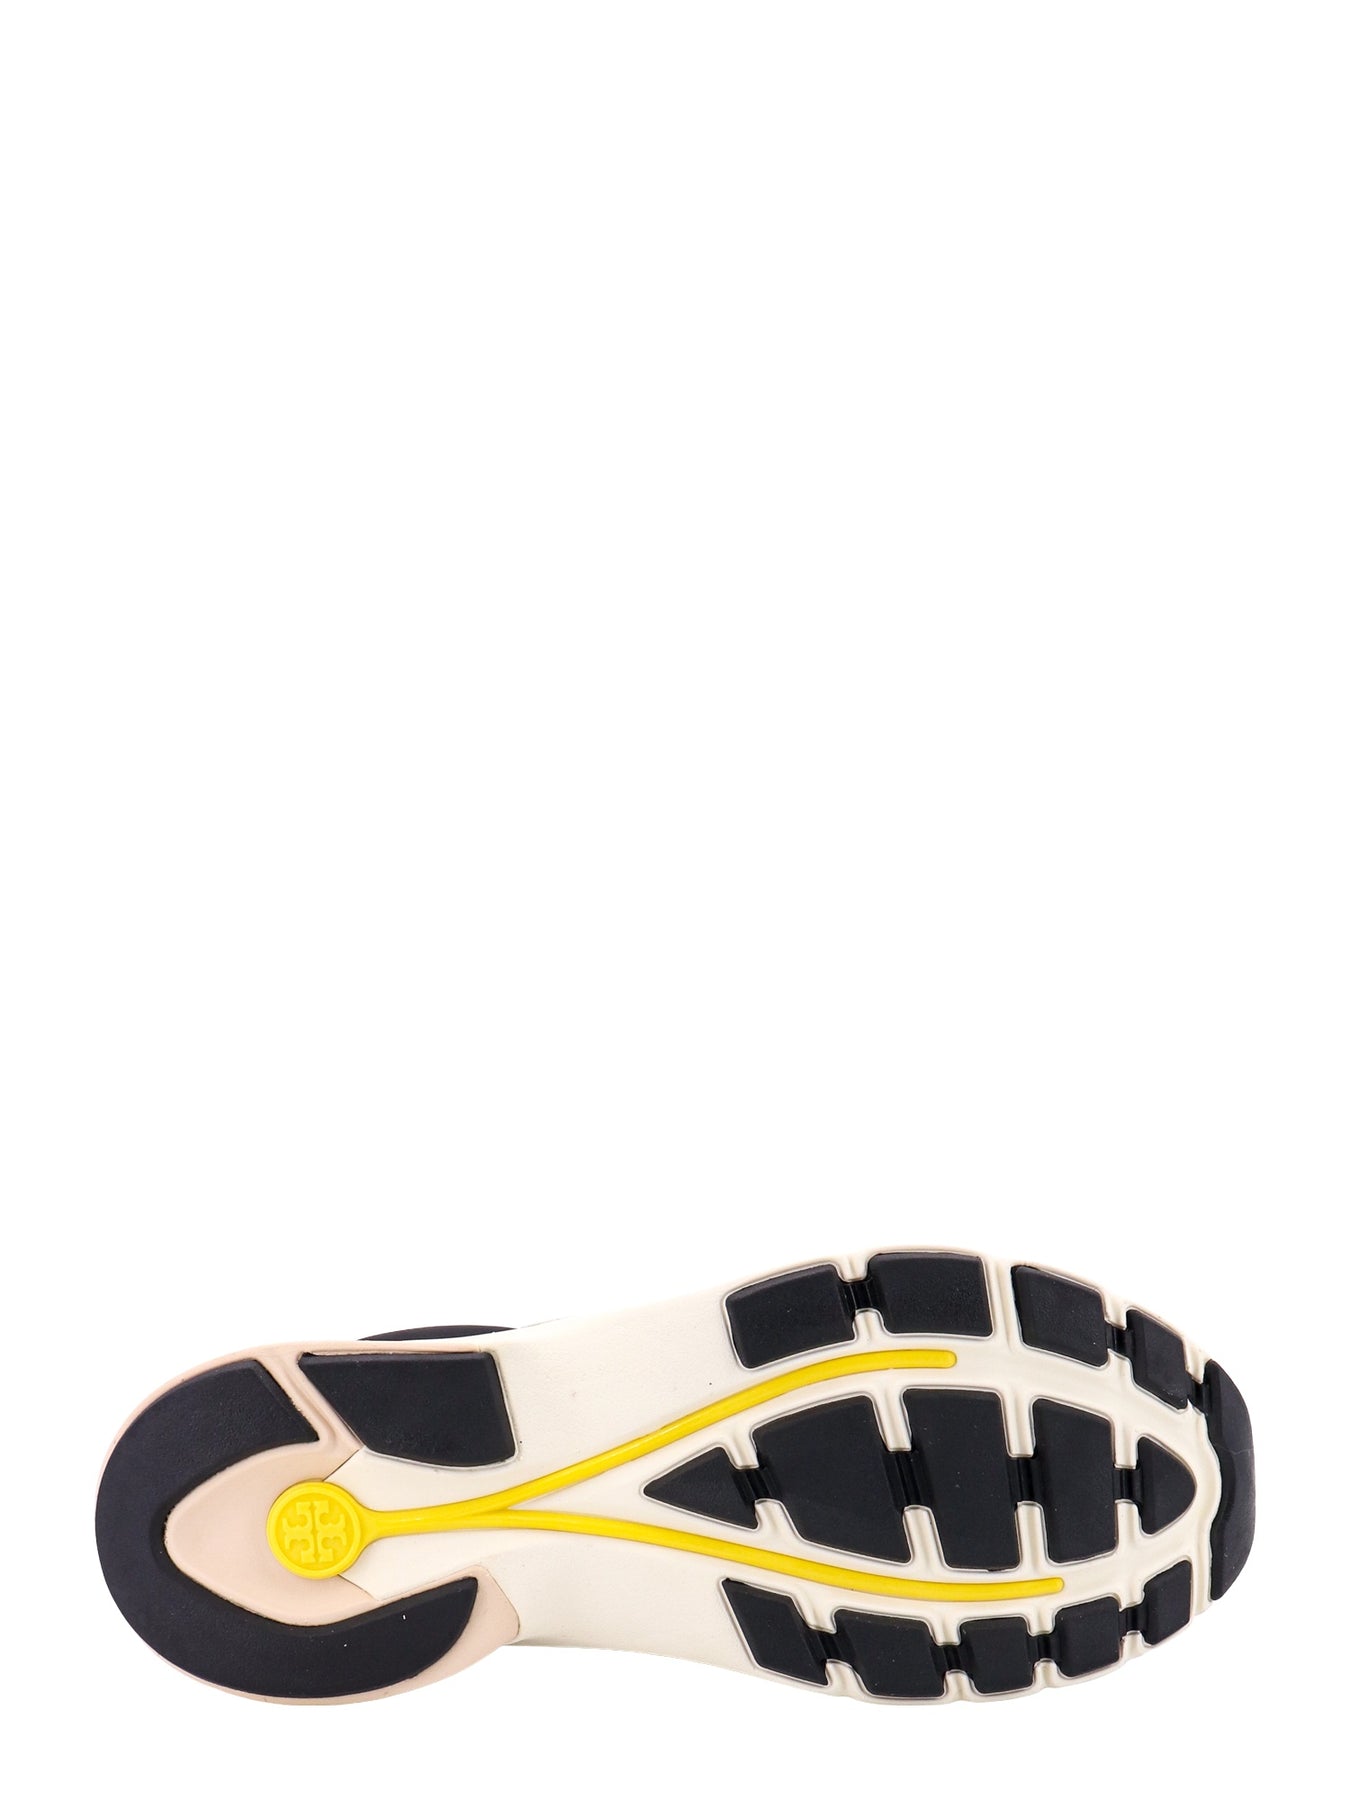 Shop Tory Burch Nylon And Suede Sneakers